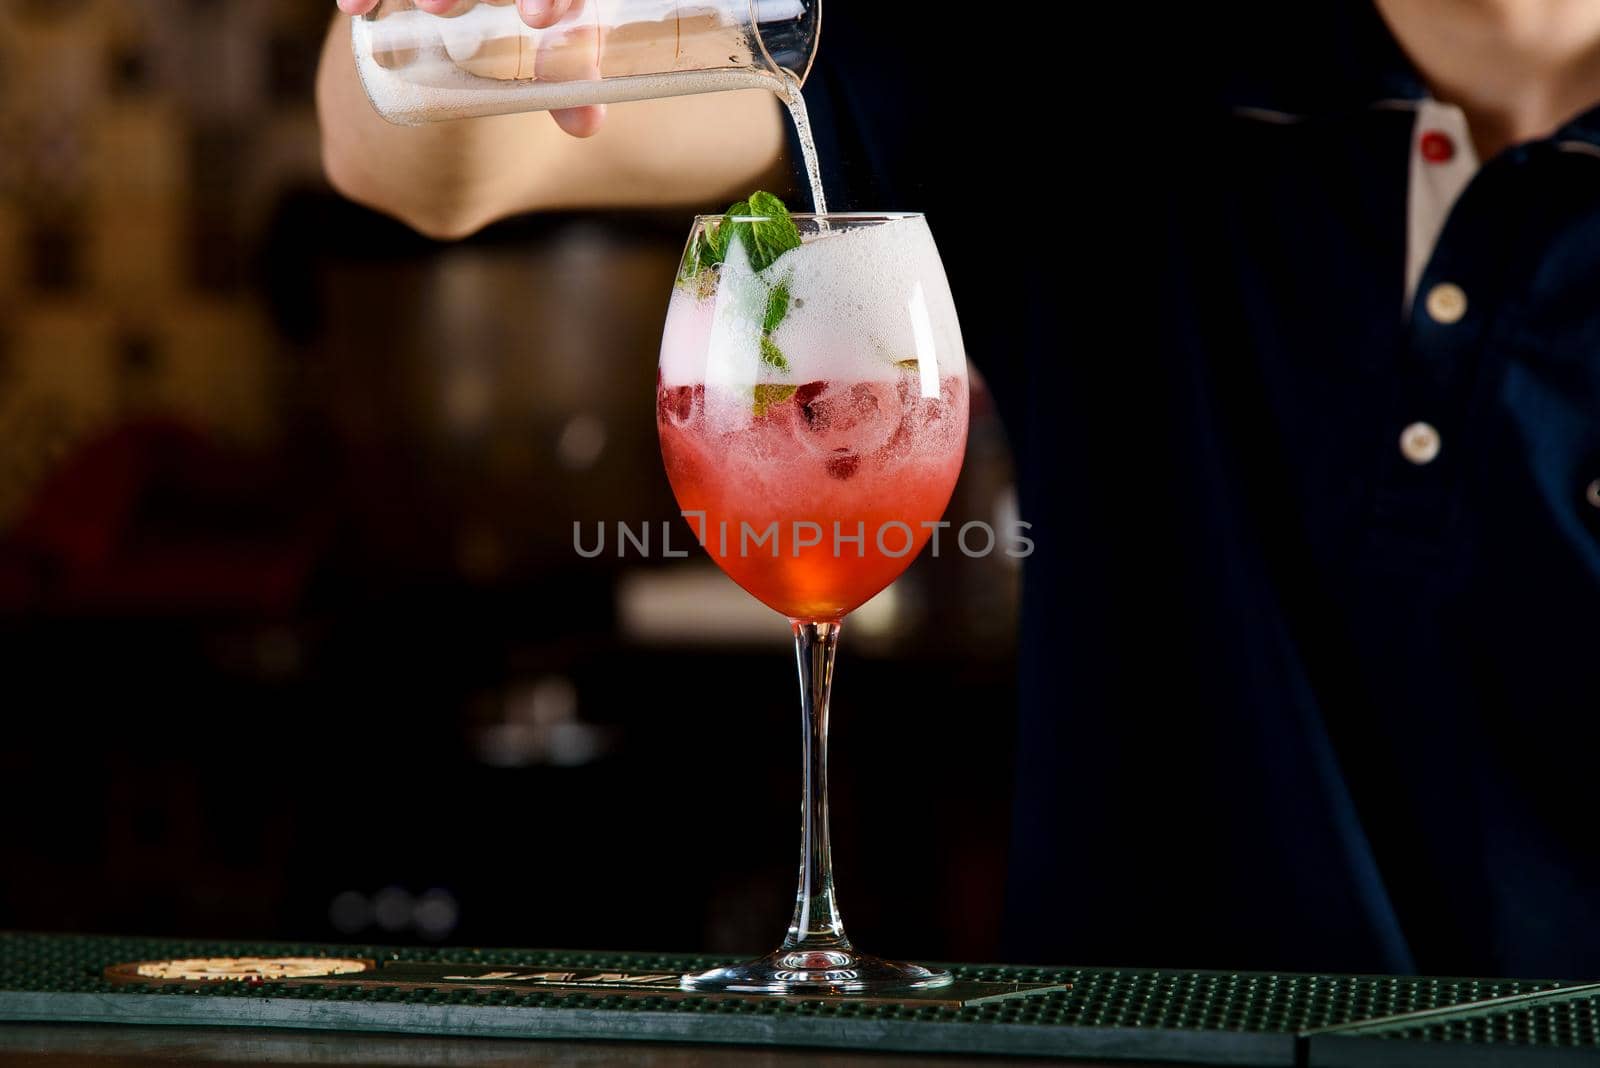 Orange alcoholic cocktail with berries and ice. Bartender preparing a cocktail.